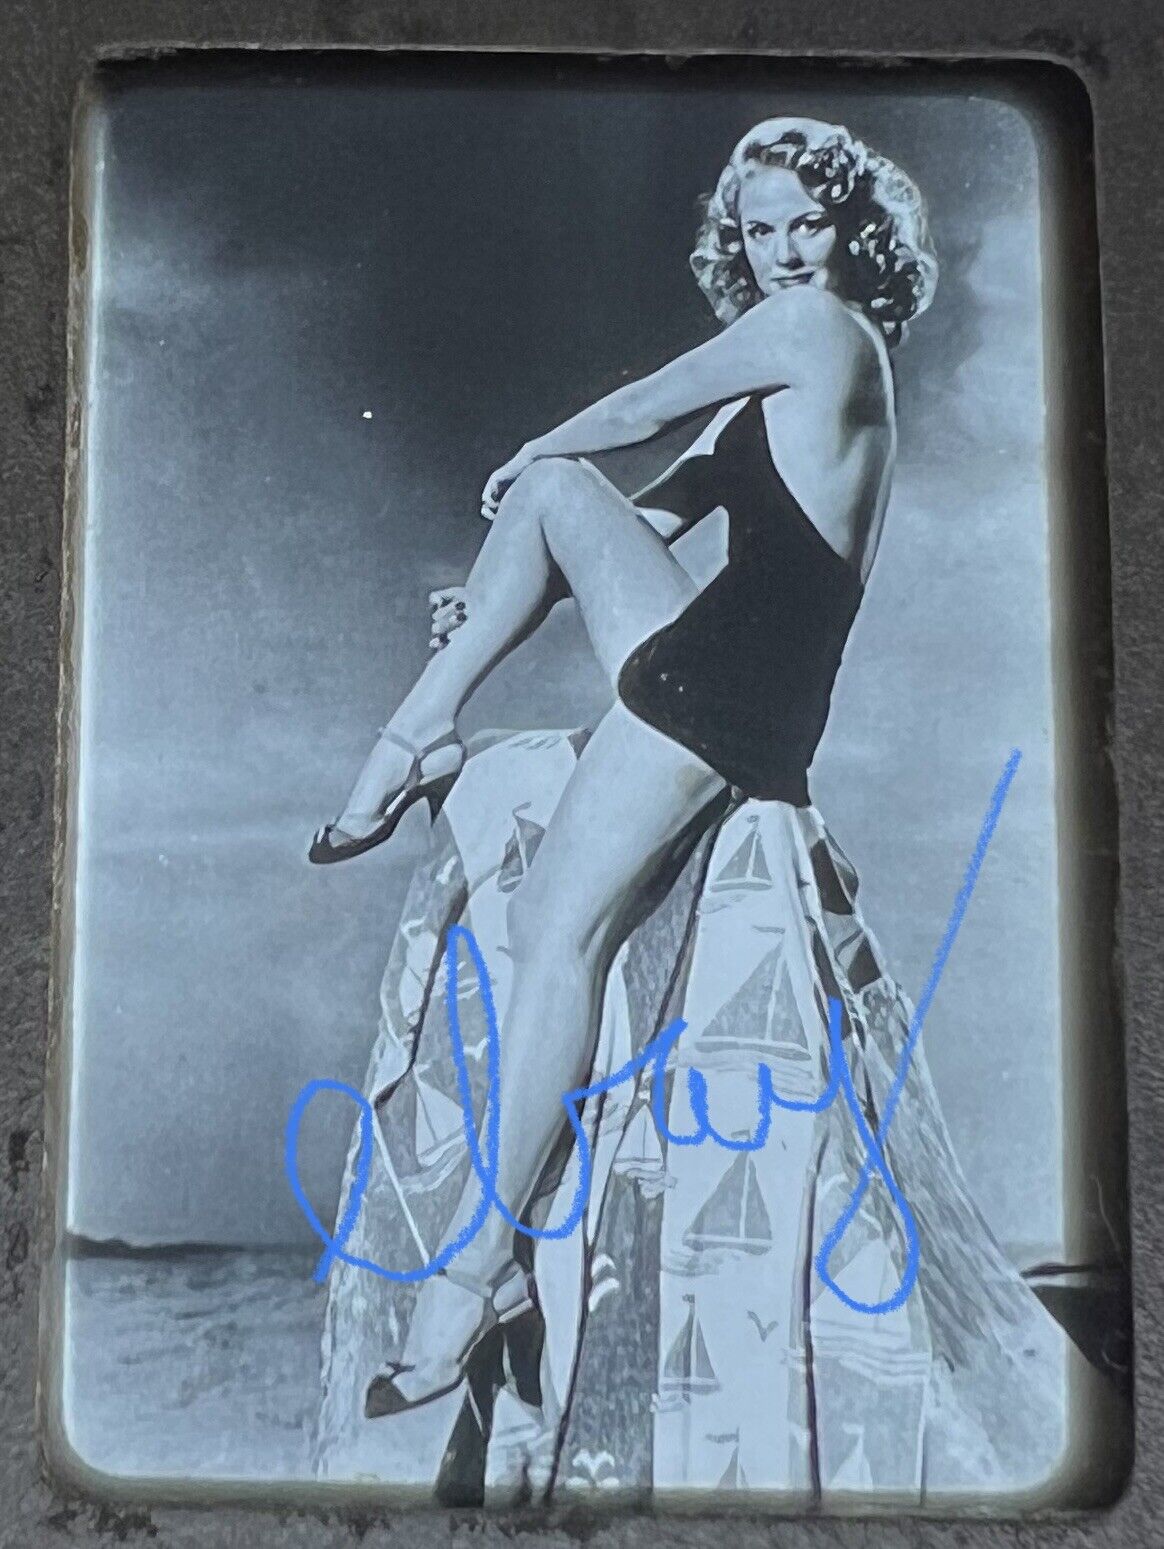 VTG c.1940s Glass Slide Transparency JANIS CARTER Swimsuit Cheesecake Risqué